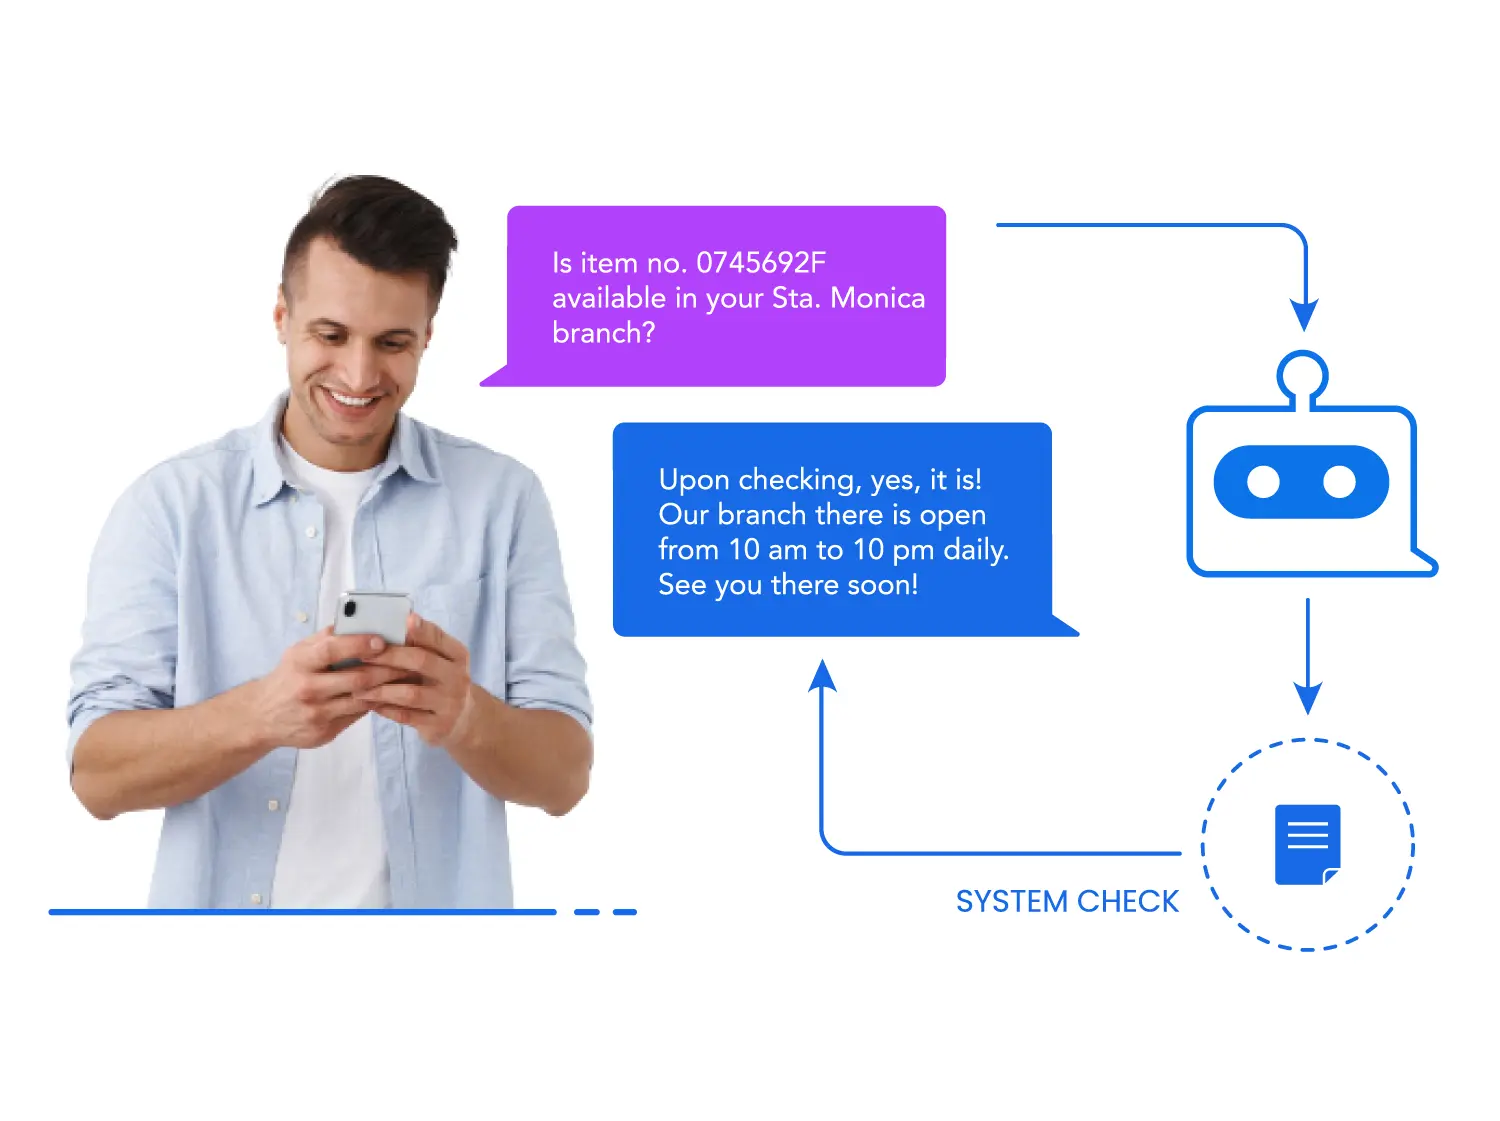 Customer Service - connecting customers to business by messaging using chatbots